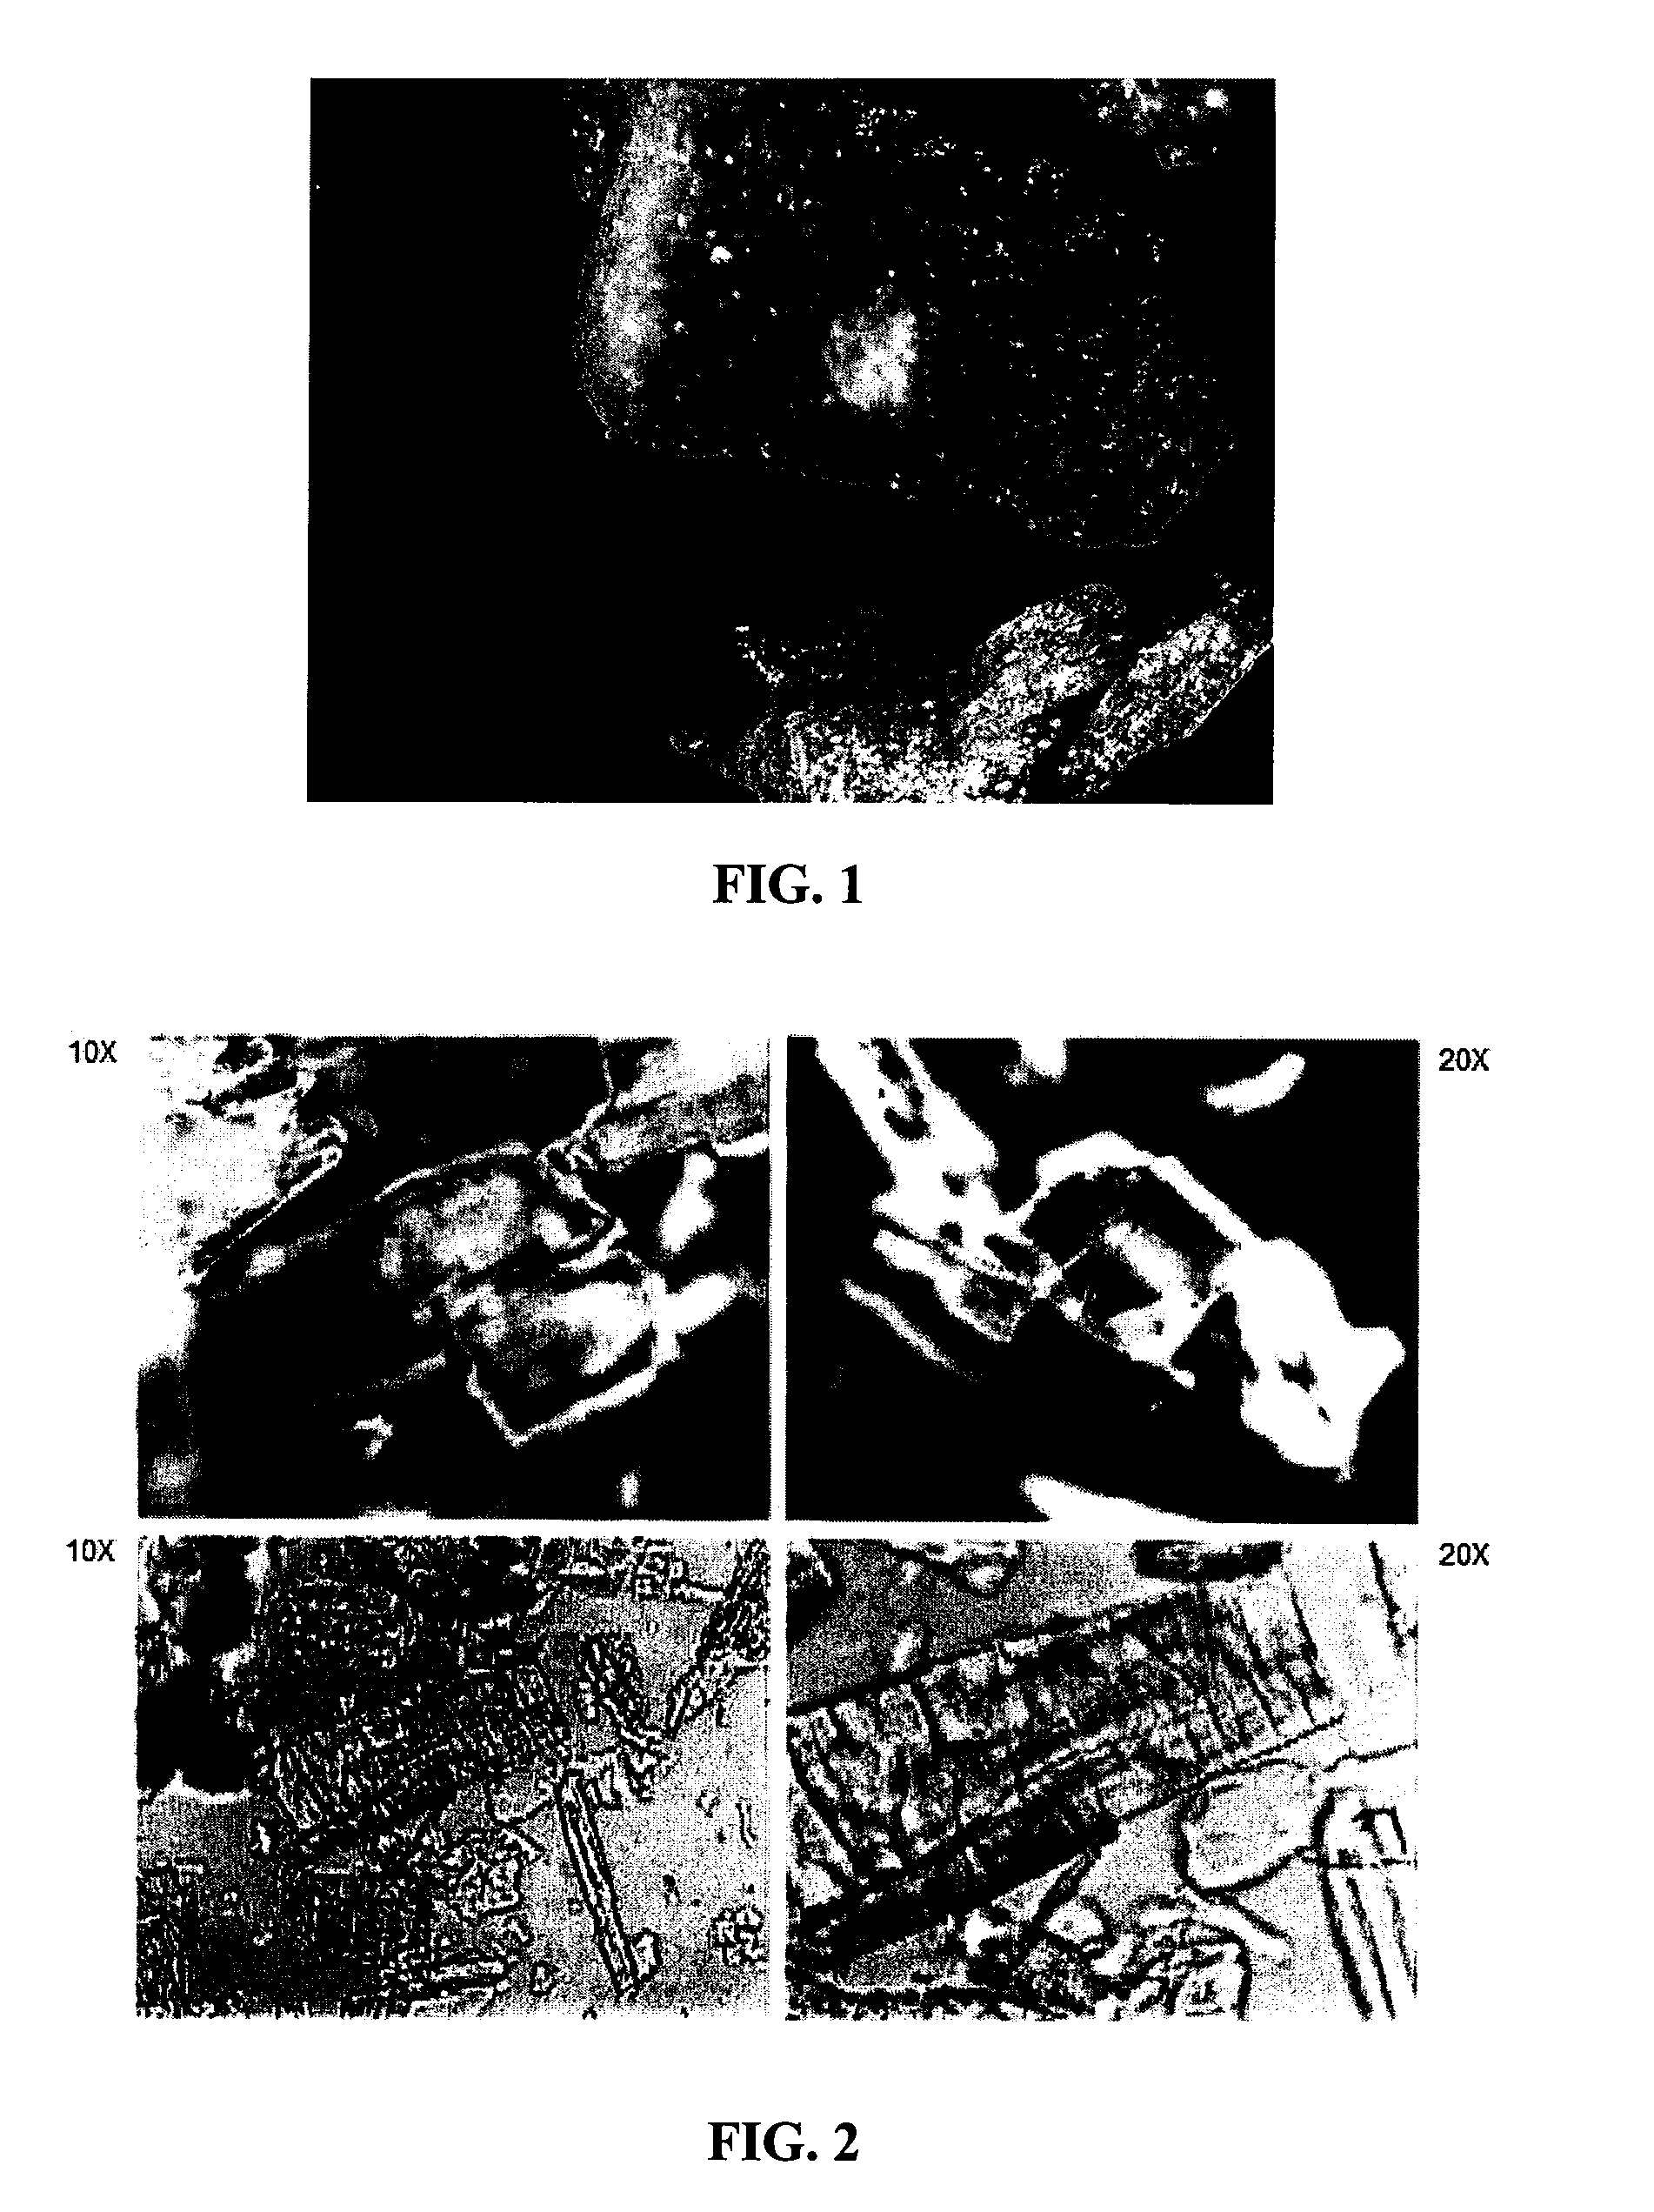 Gasified Food Products and Methods of Preparation Thereof